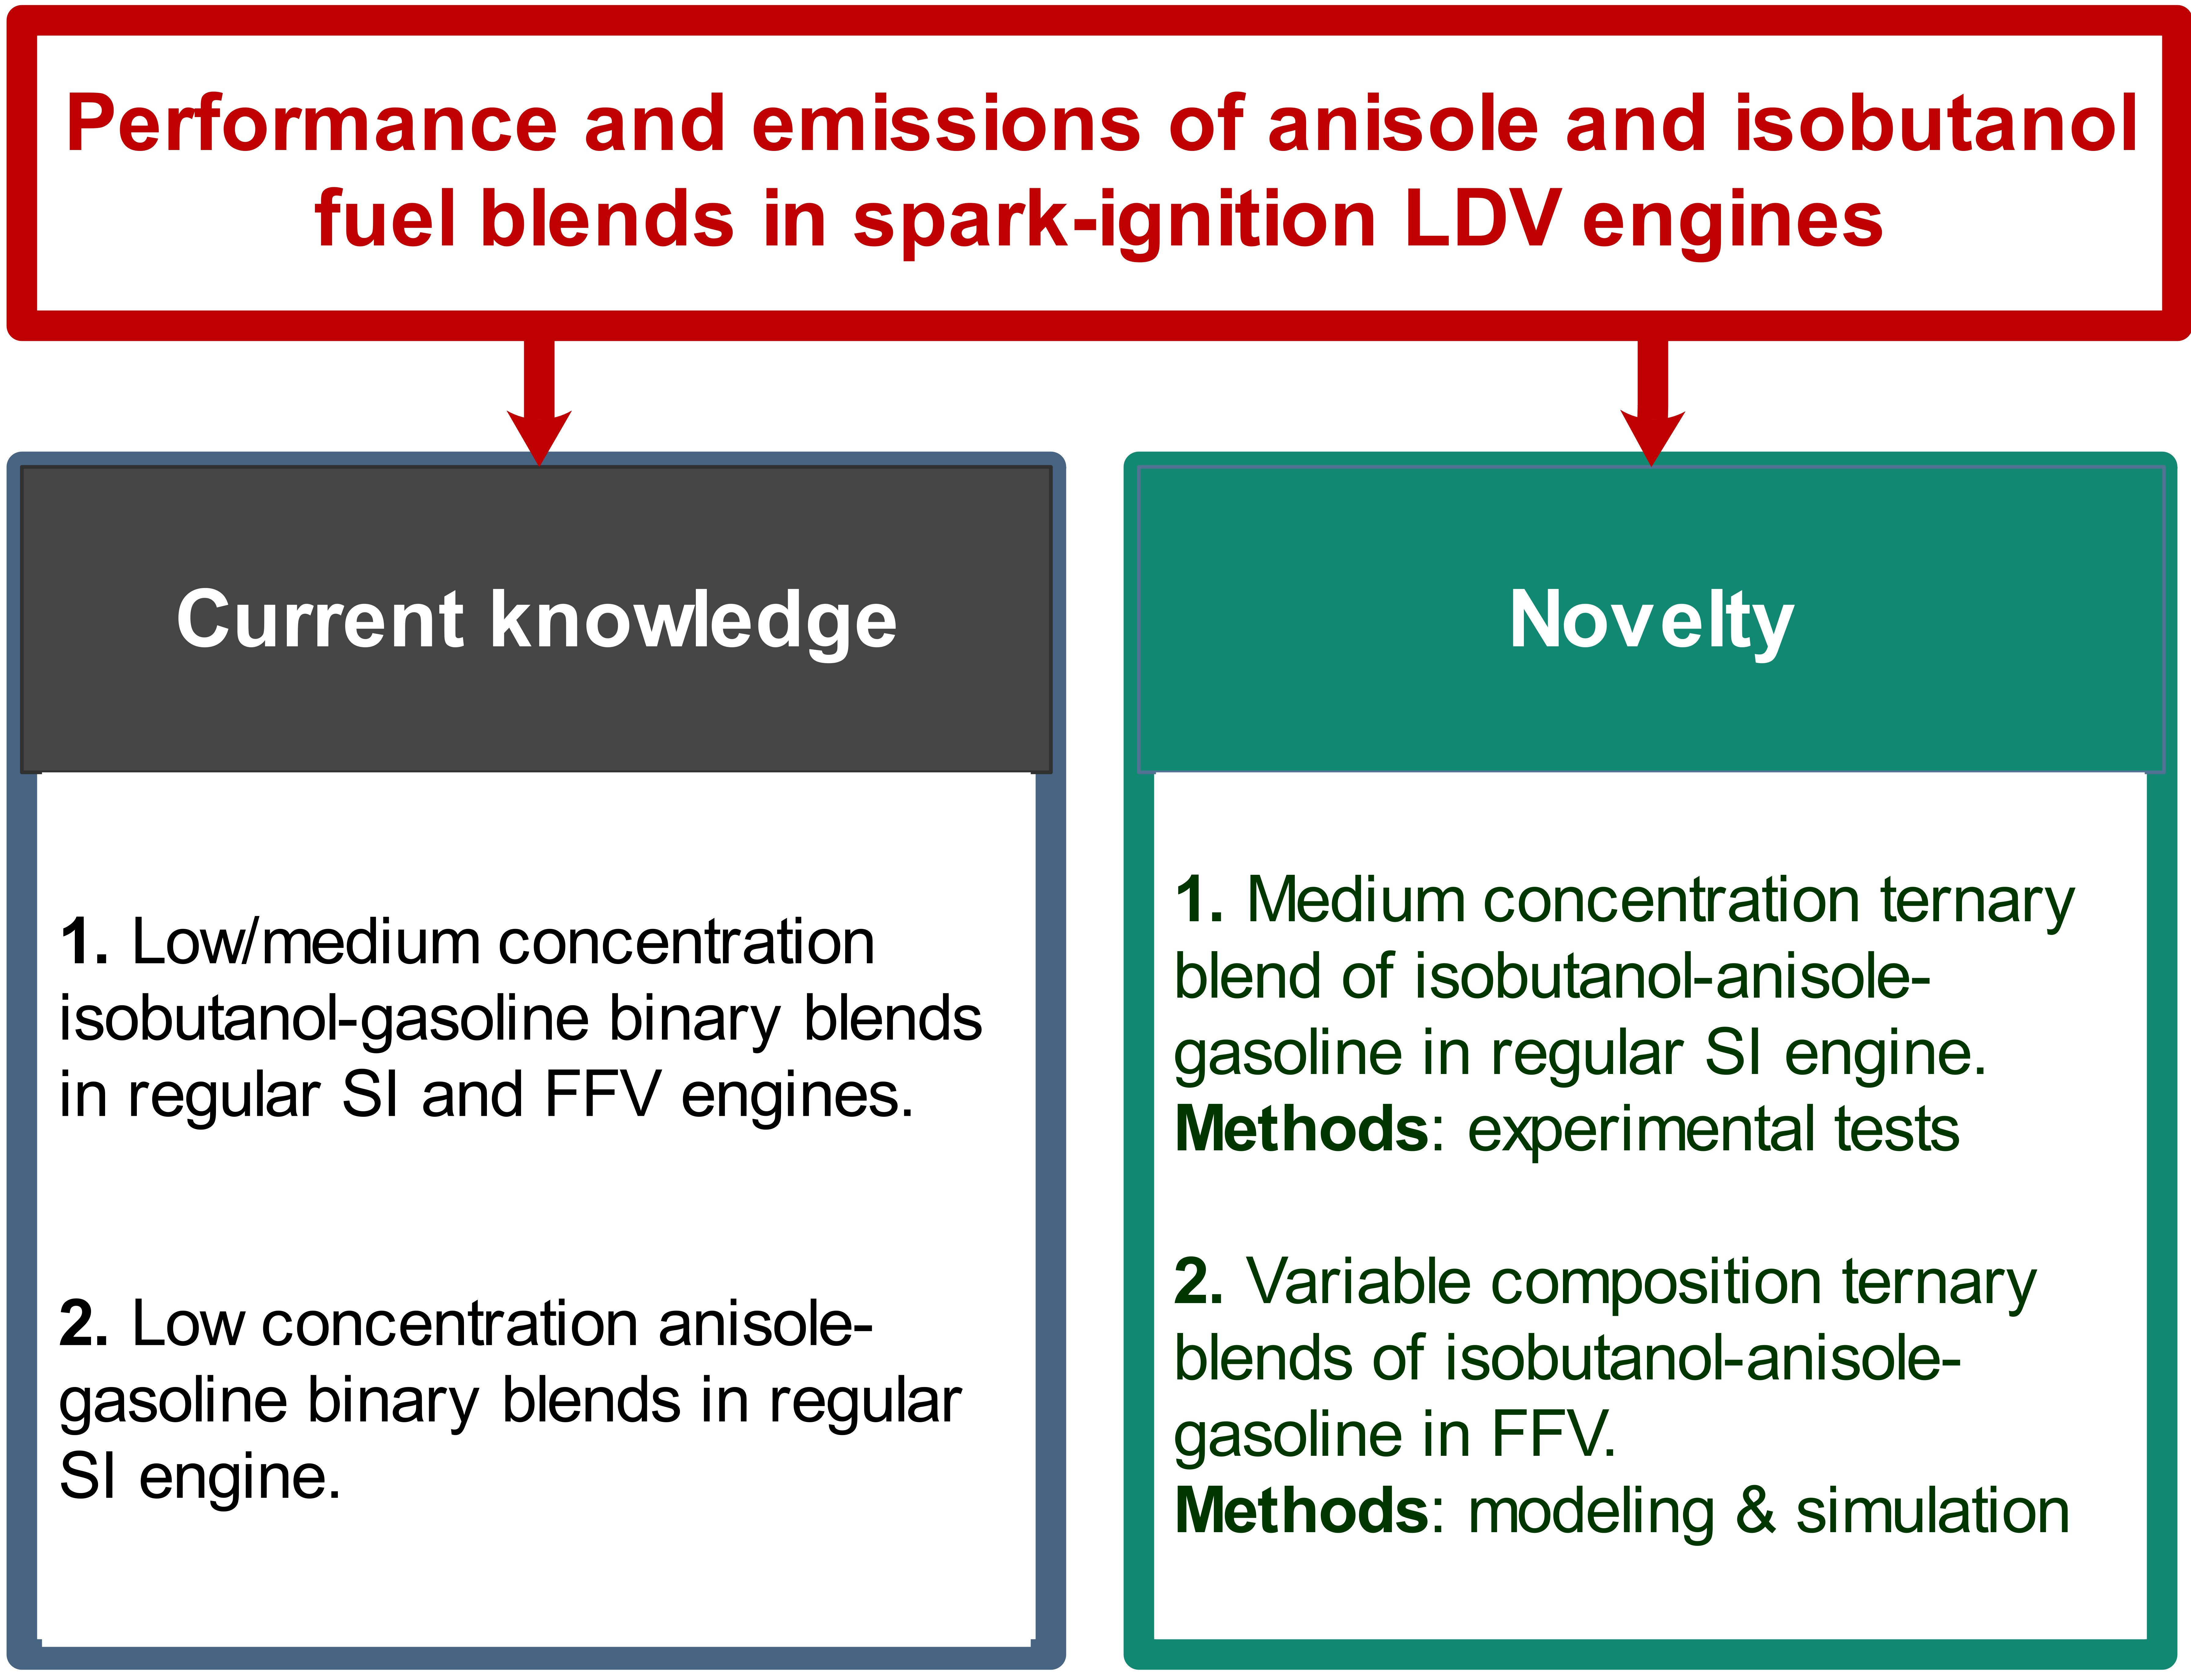 Cinemática Confundir Desmenuzar Sustainability | Free Full-Text | Performance of Anisole and Isobutanol as  Gasoline Bio-Blendstocks for Spark Ignition Engines